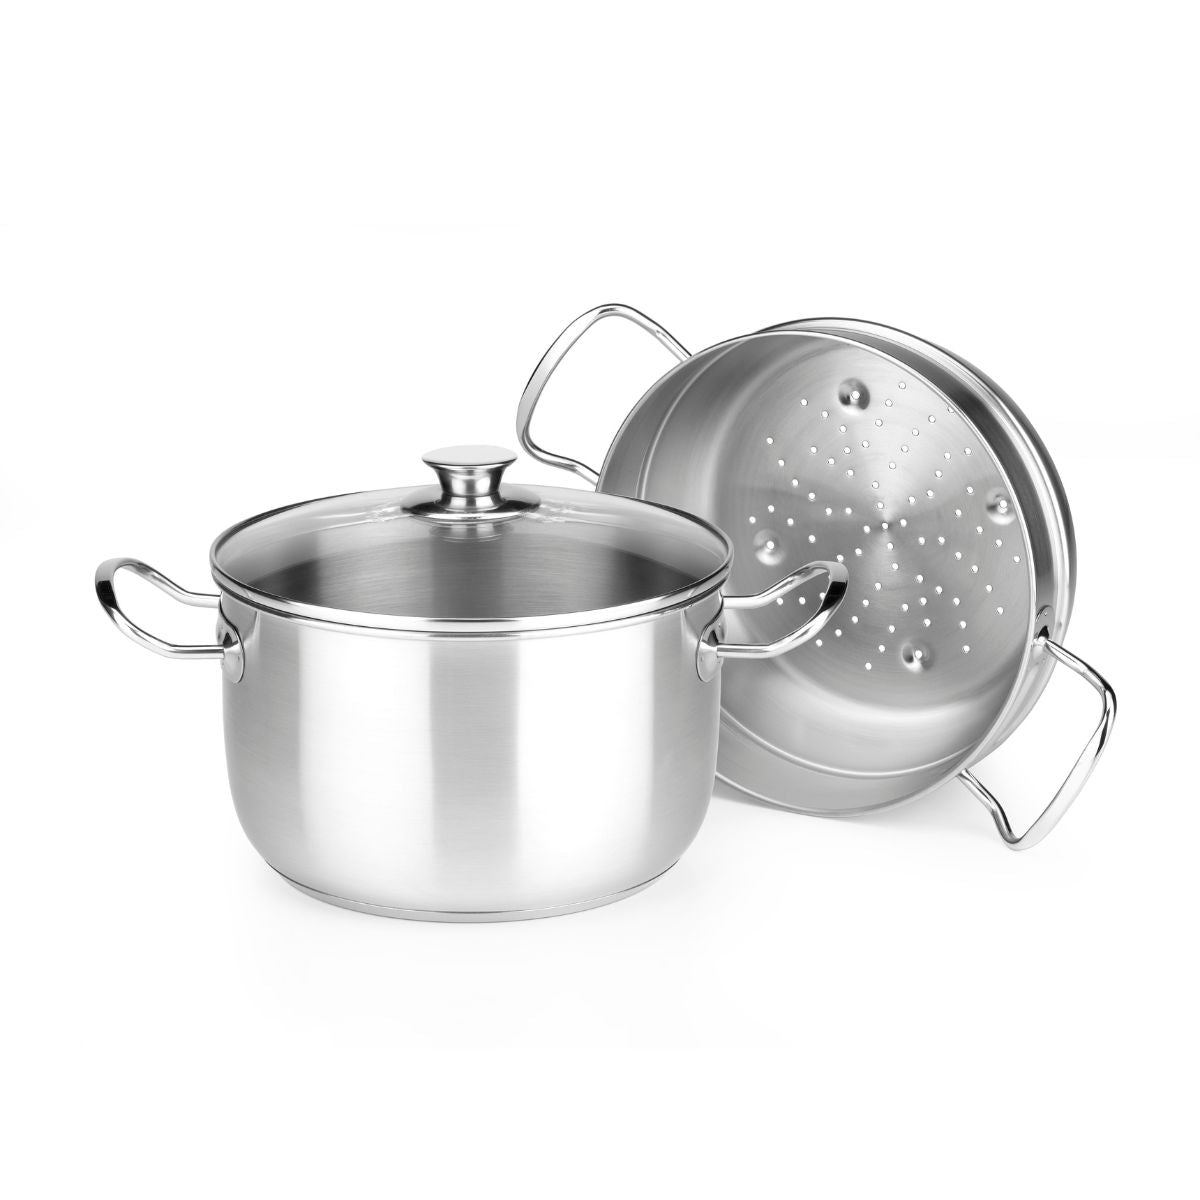 Chef Steamer with Glass Lid